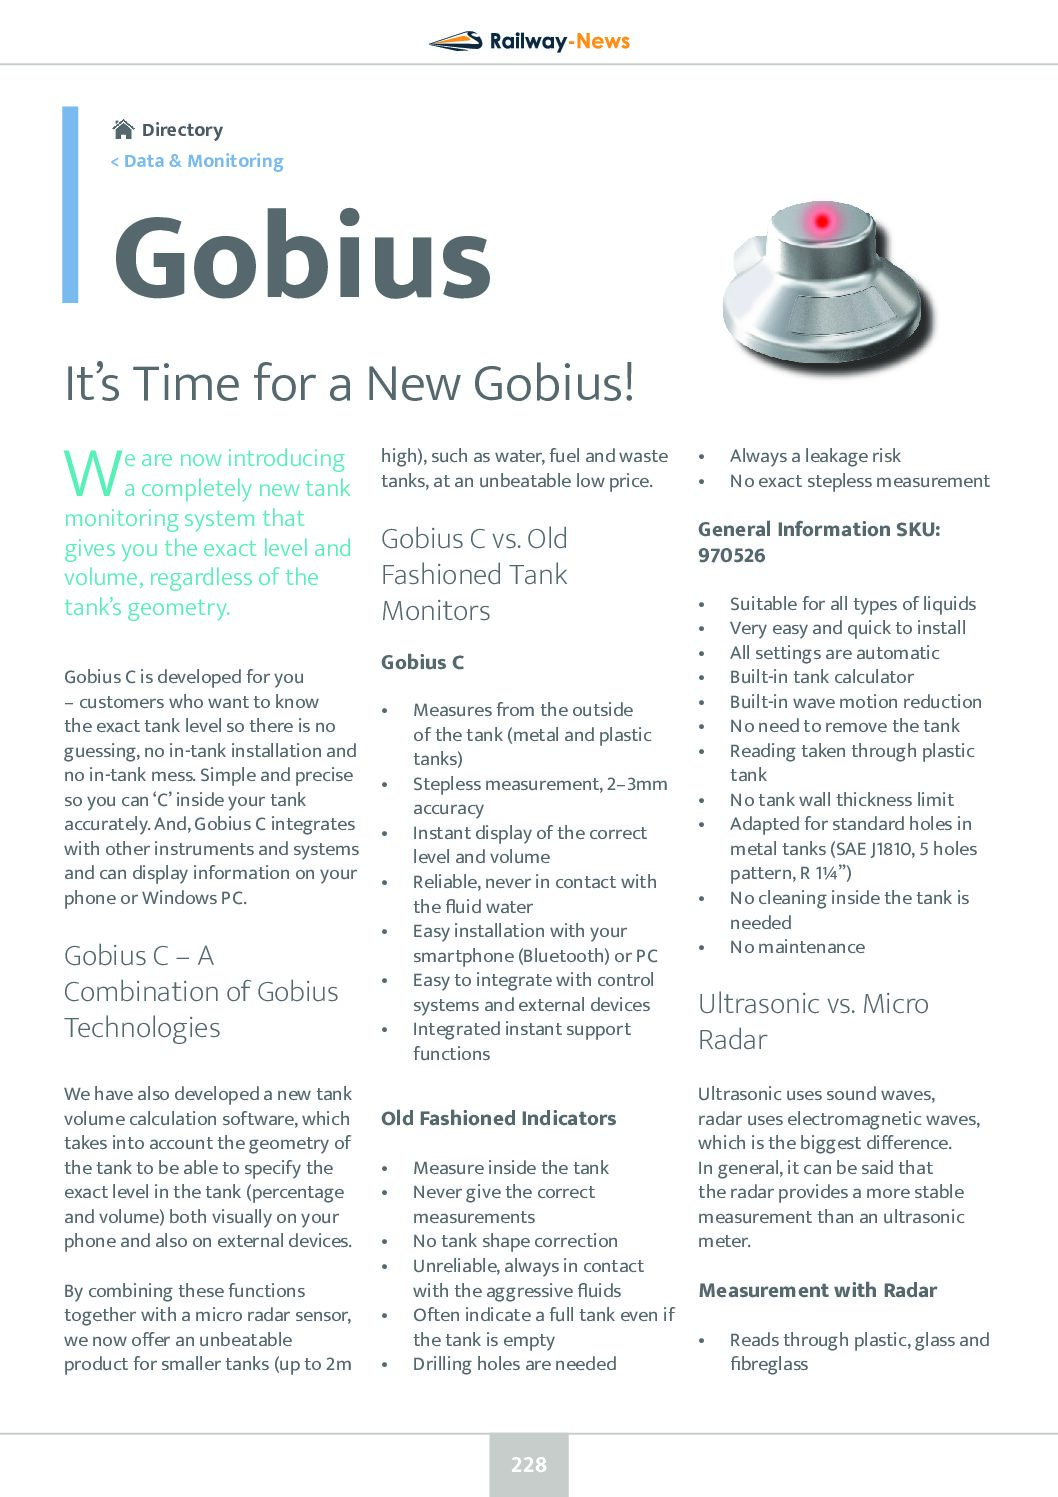 It’s Time for a New Gobius!